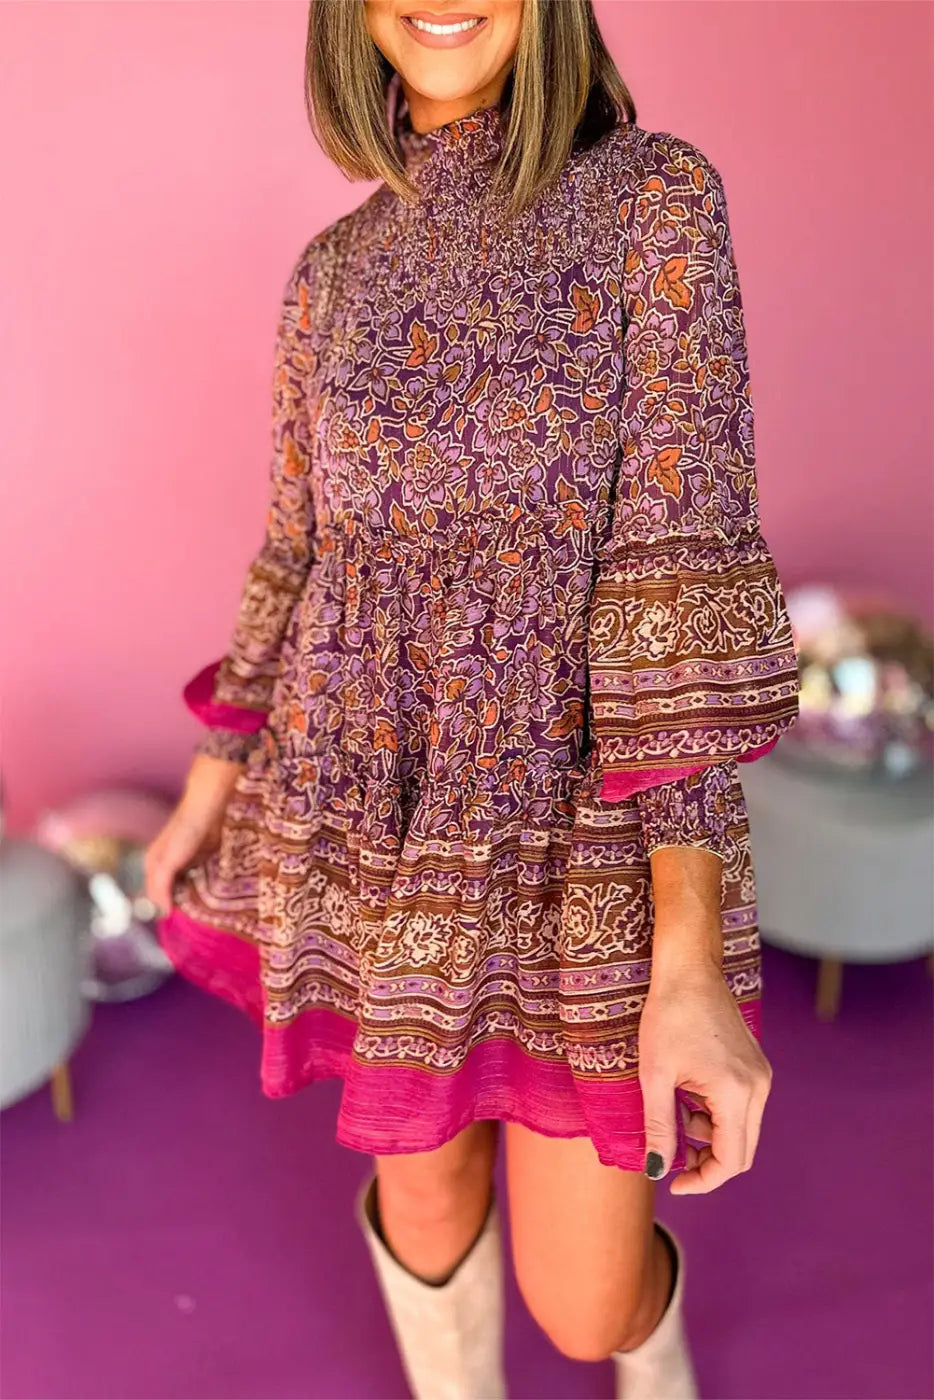 Floral patterned autumn bloom mini dress with high neck and flared sleeves in purple and pink